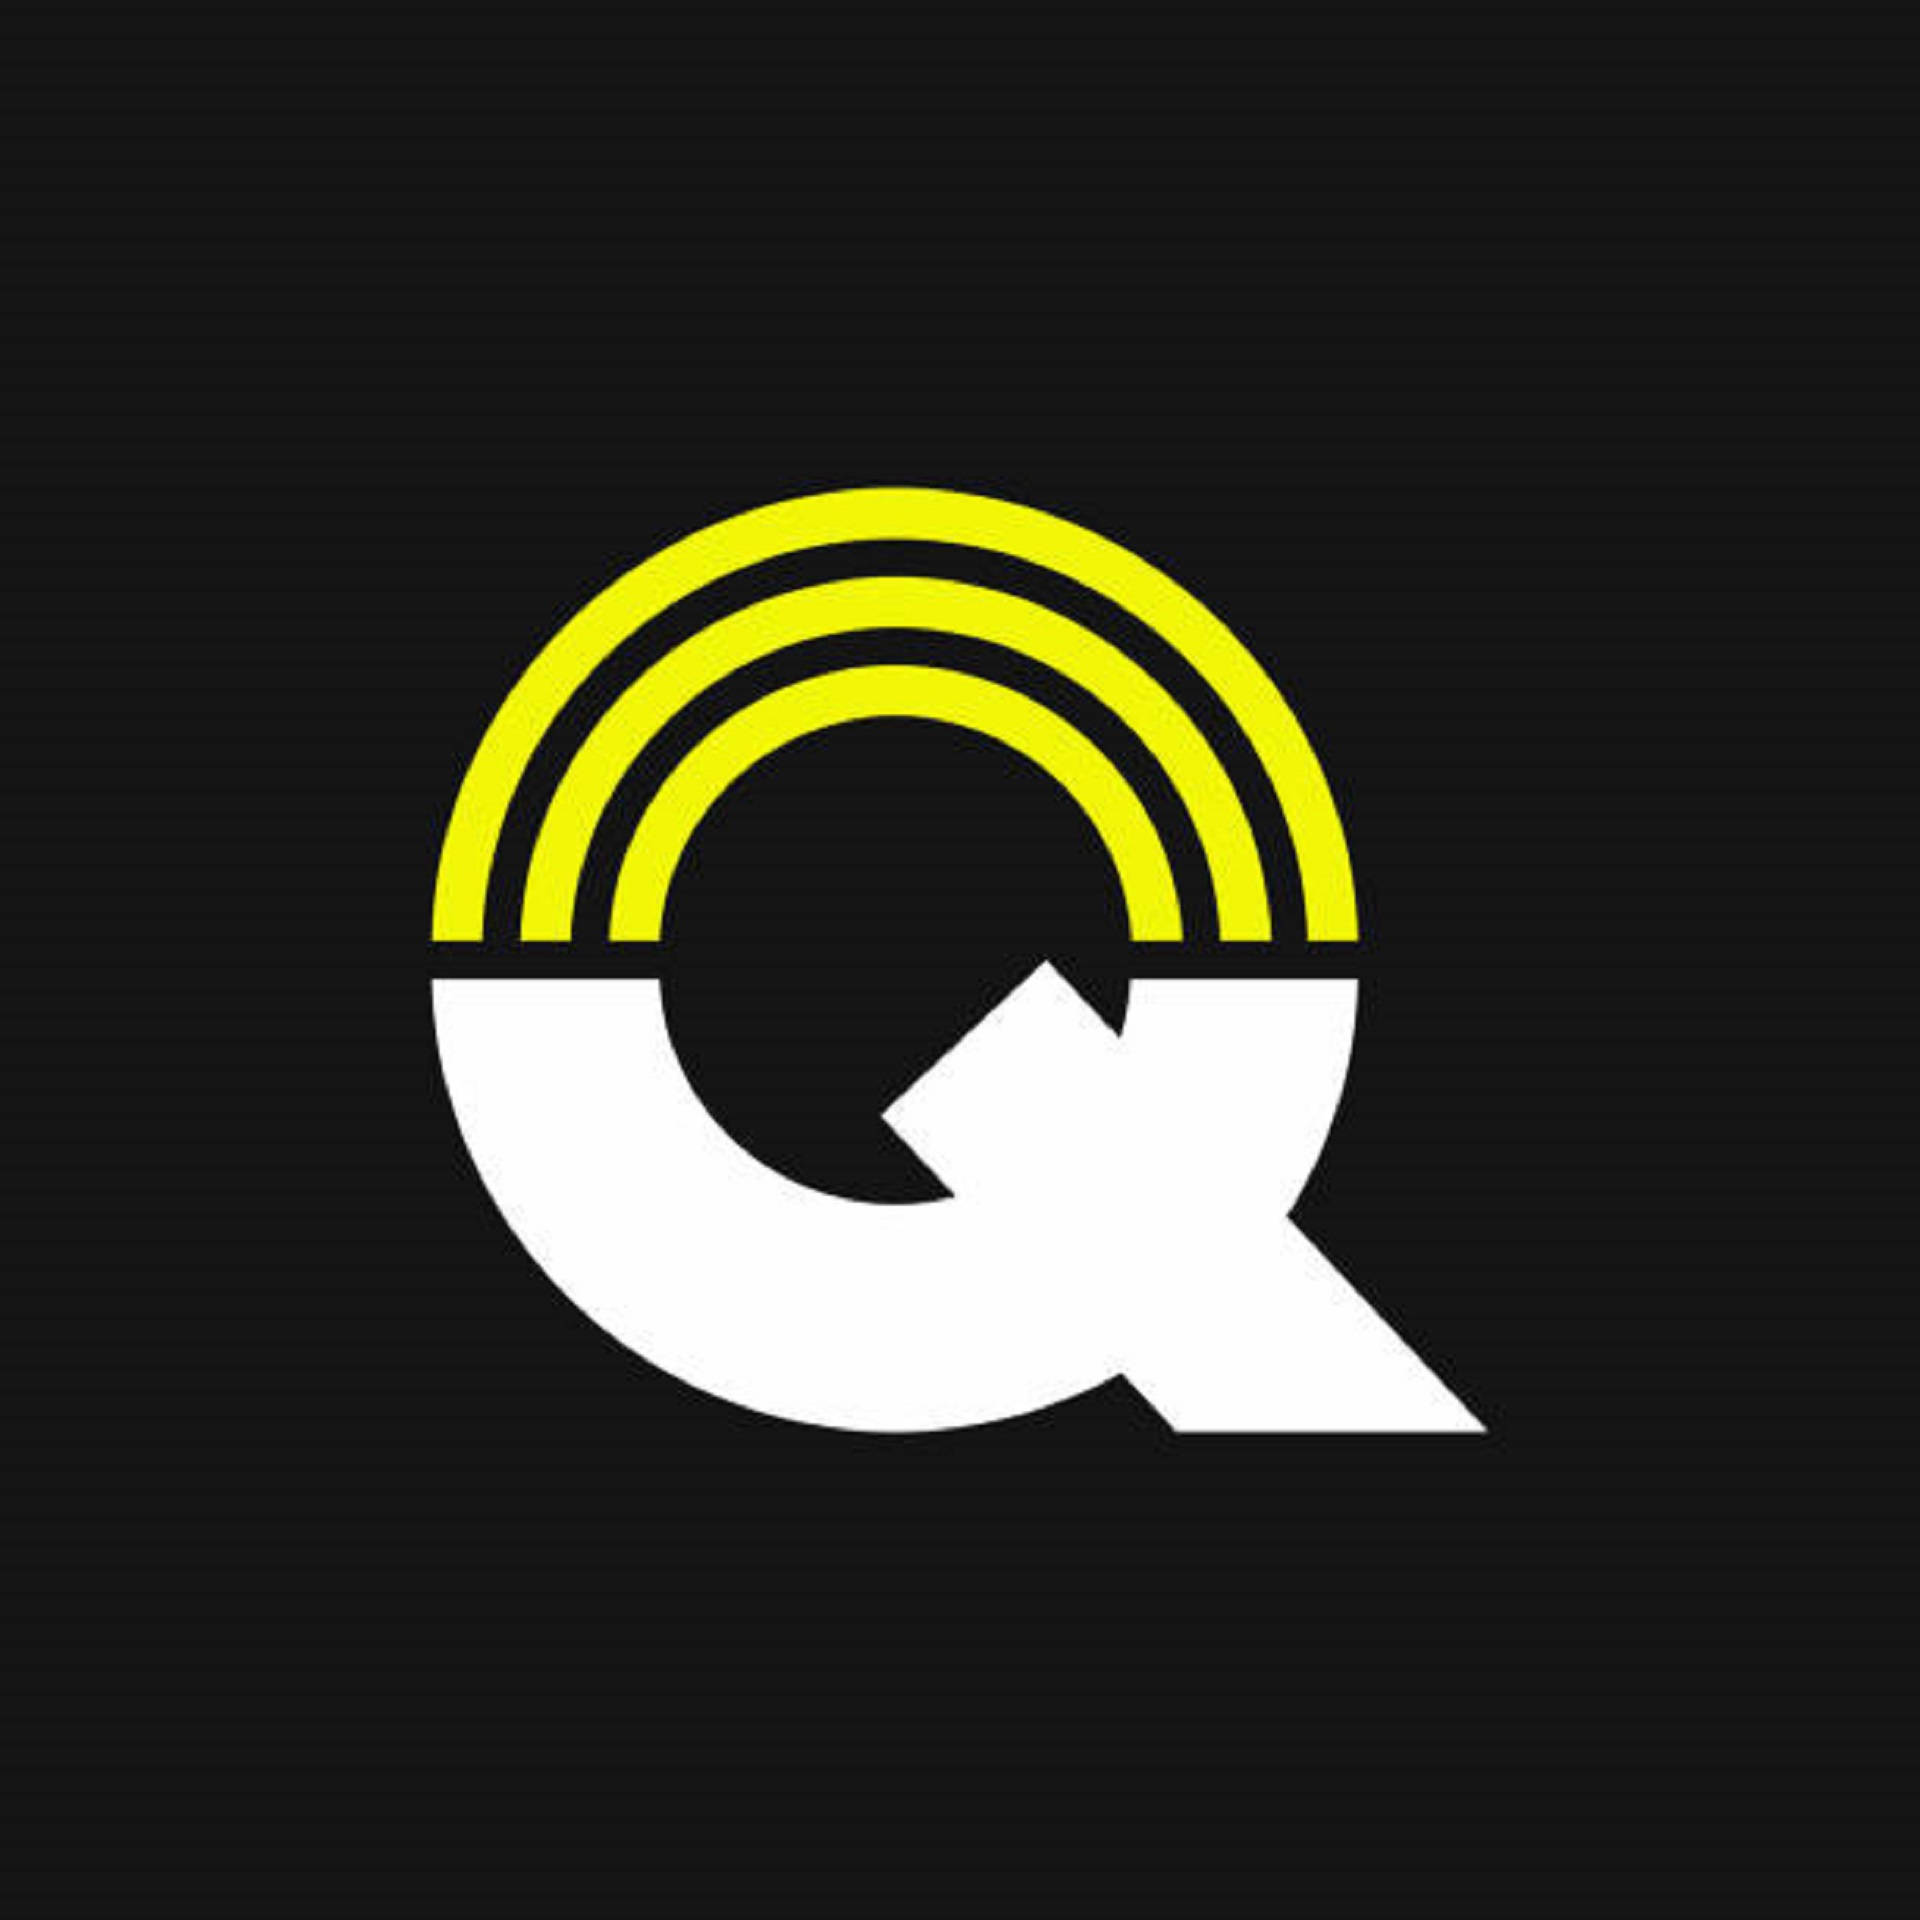 Yellow And White Letter Q Background